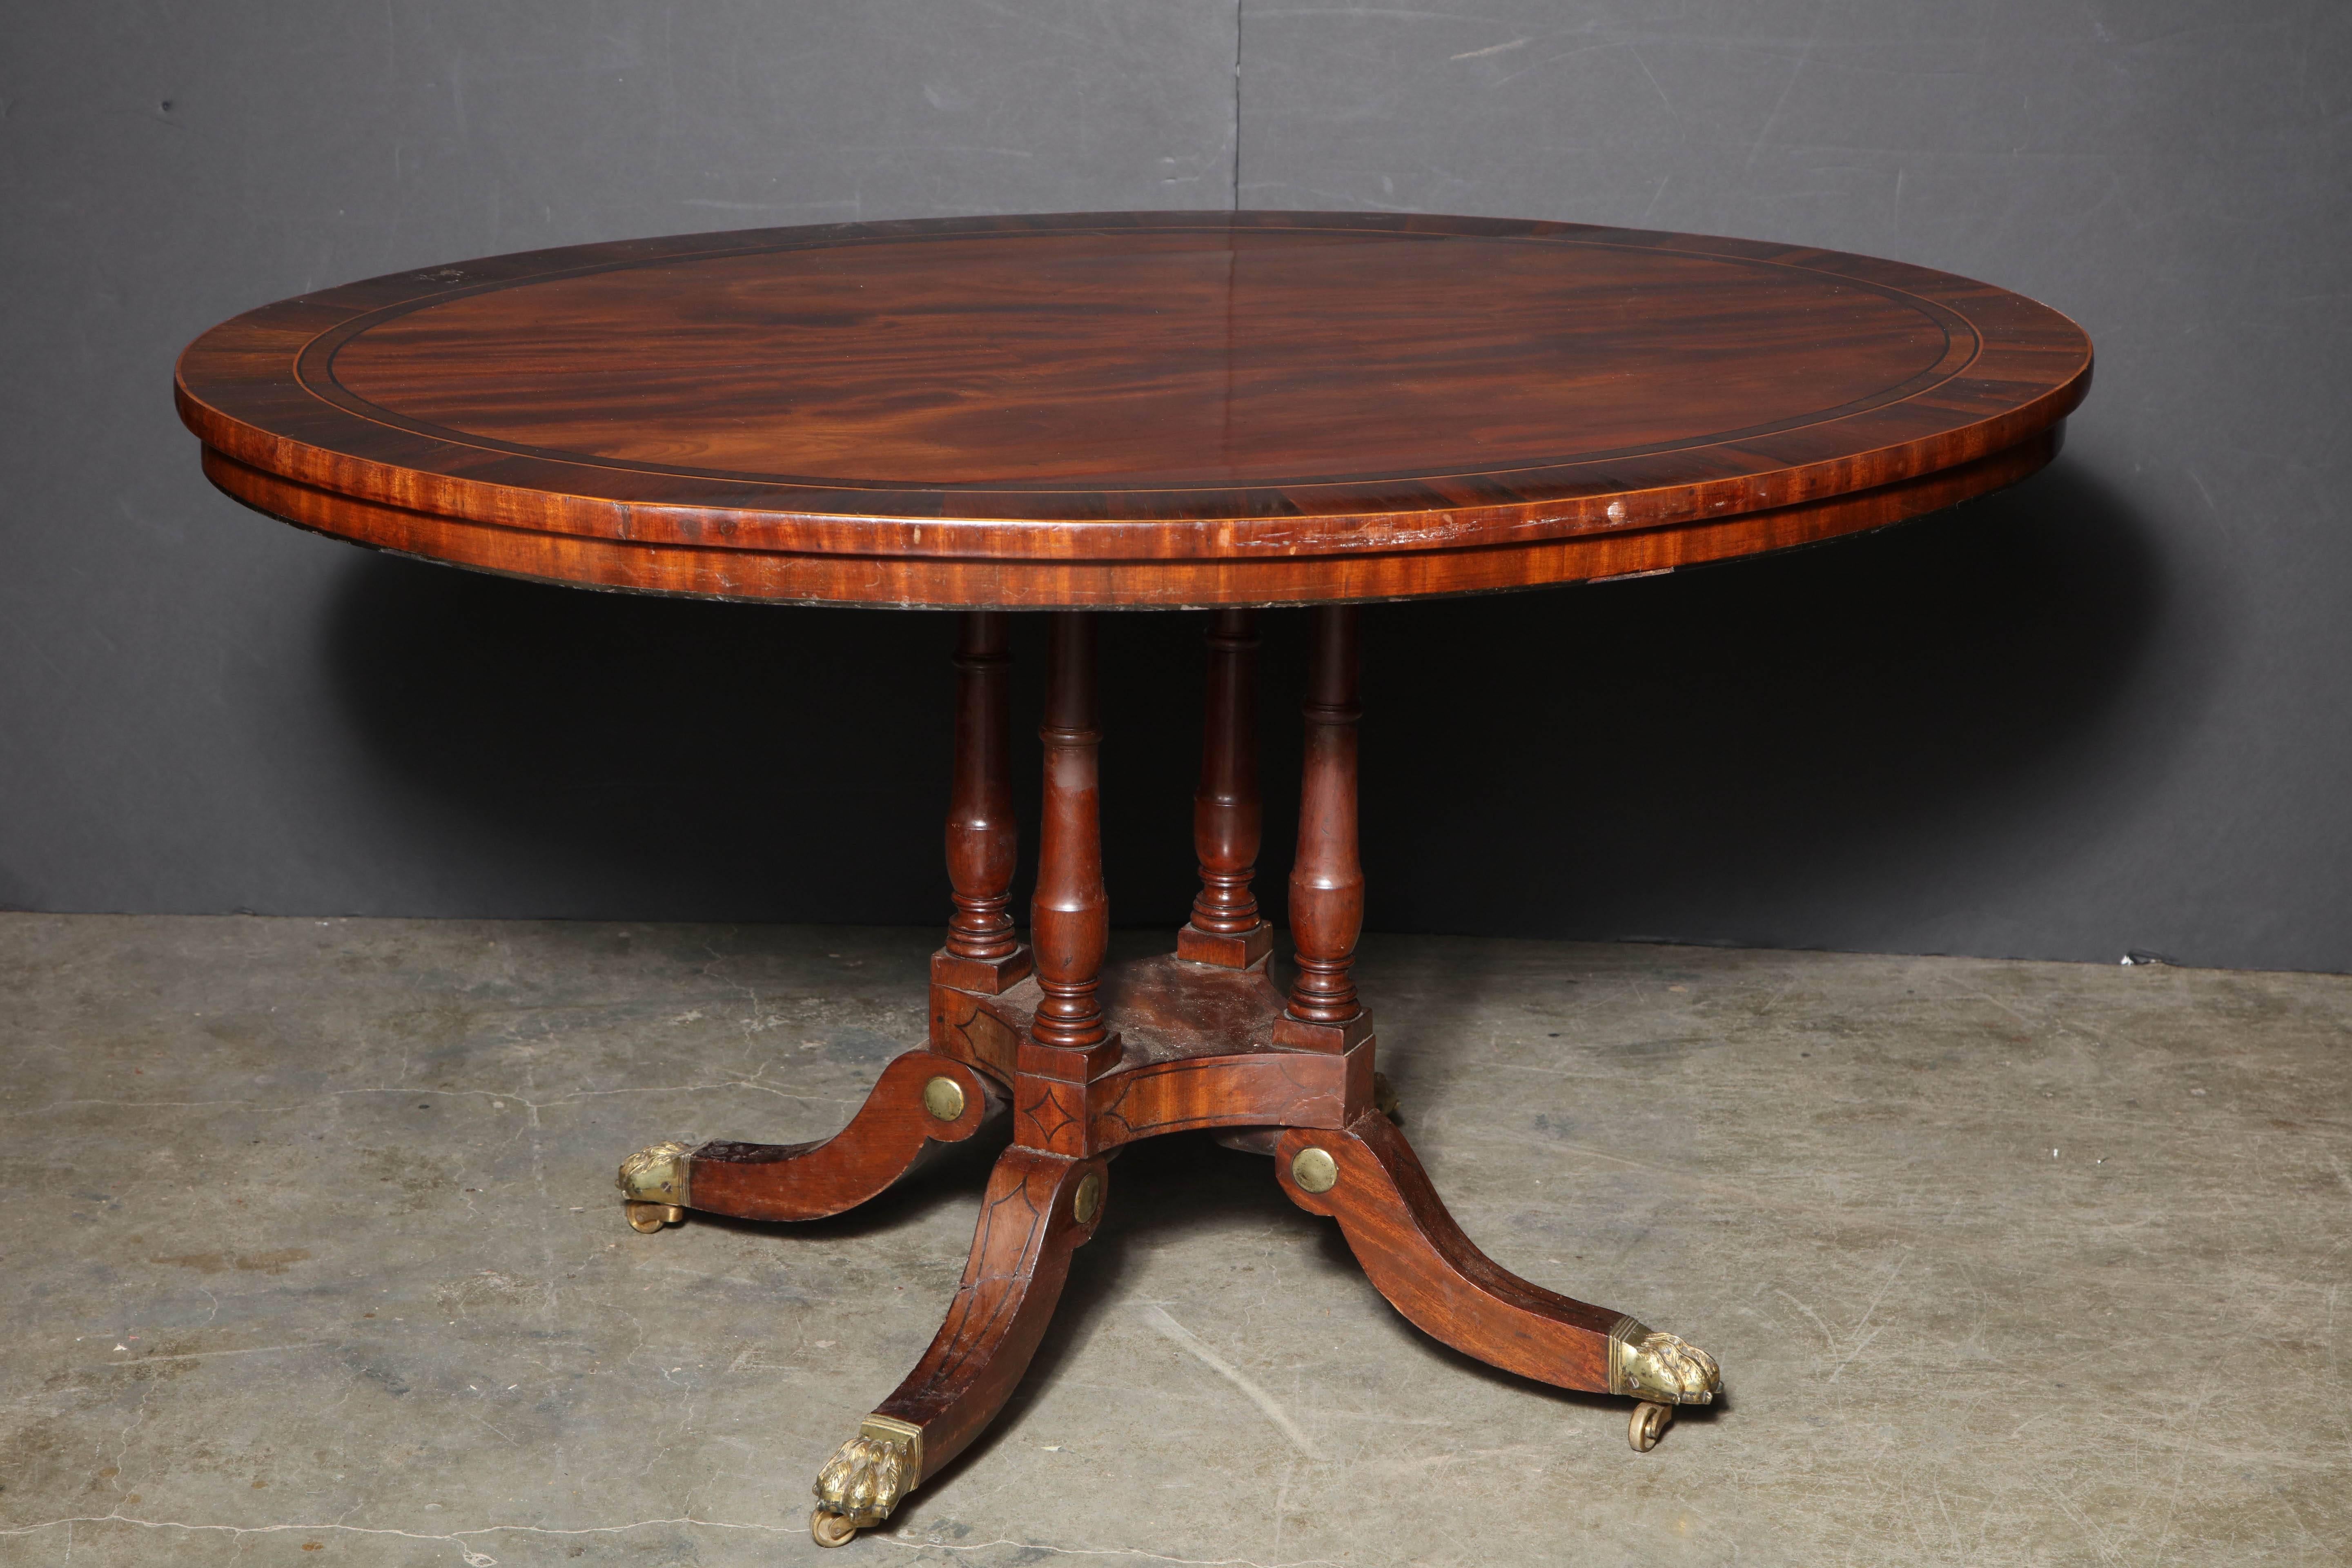 Regency mahogany rosewood crossbanded tilting oval centre table with a four-column pedestal base, intricate buhl brass inlay on brass paw foot casters.